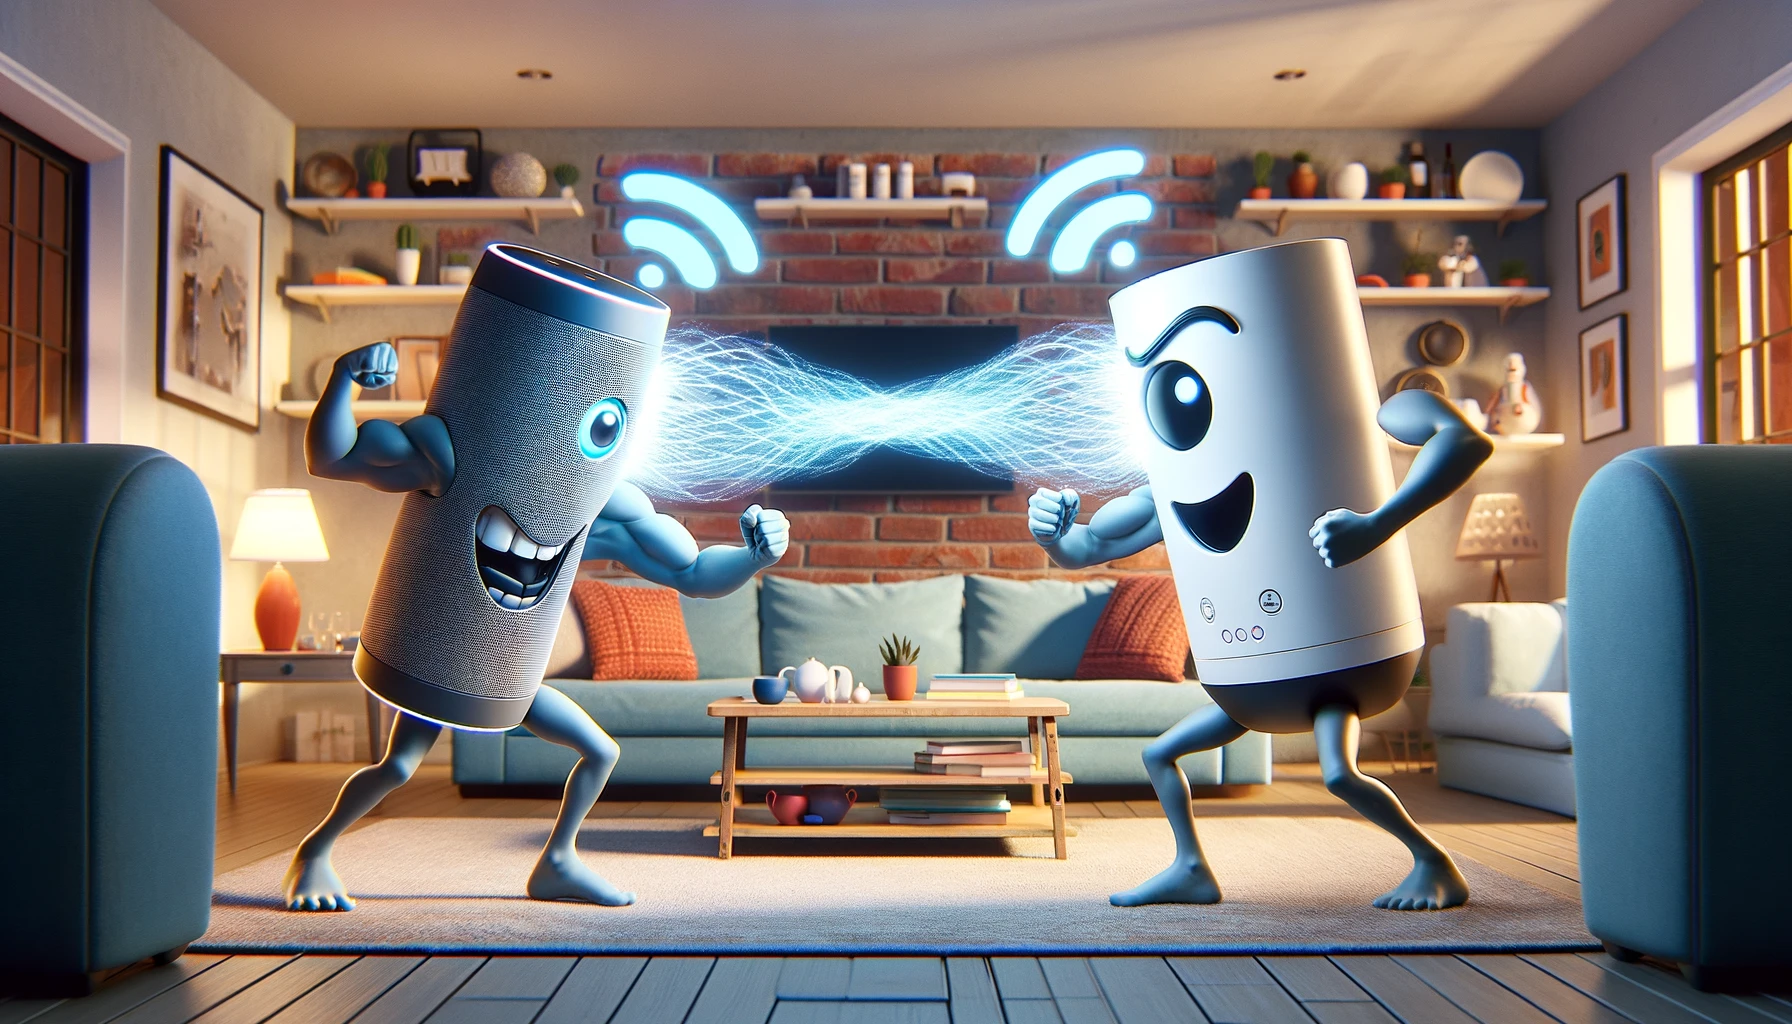 Two smart home devices battling it out for wifi